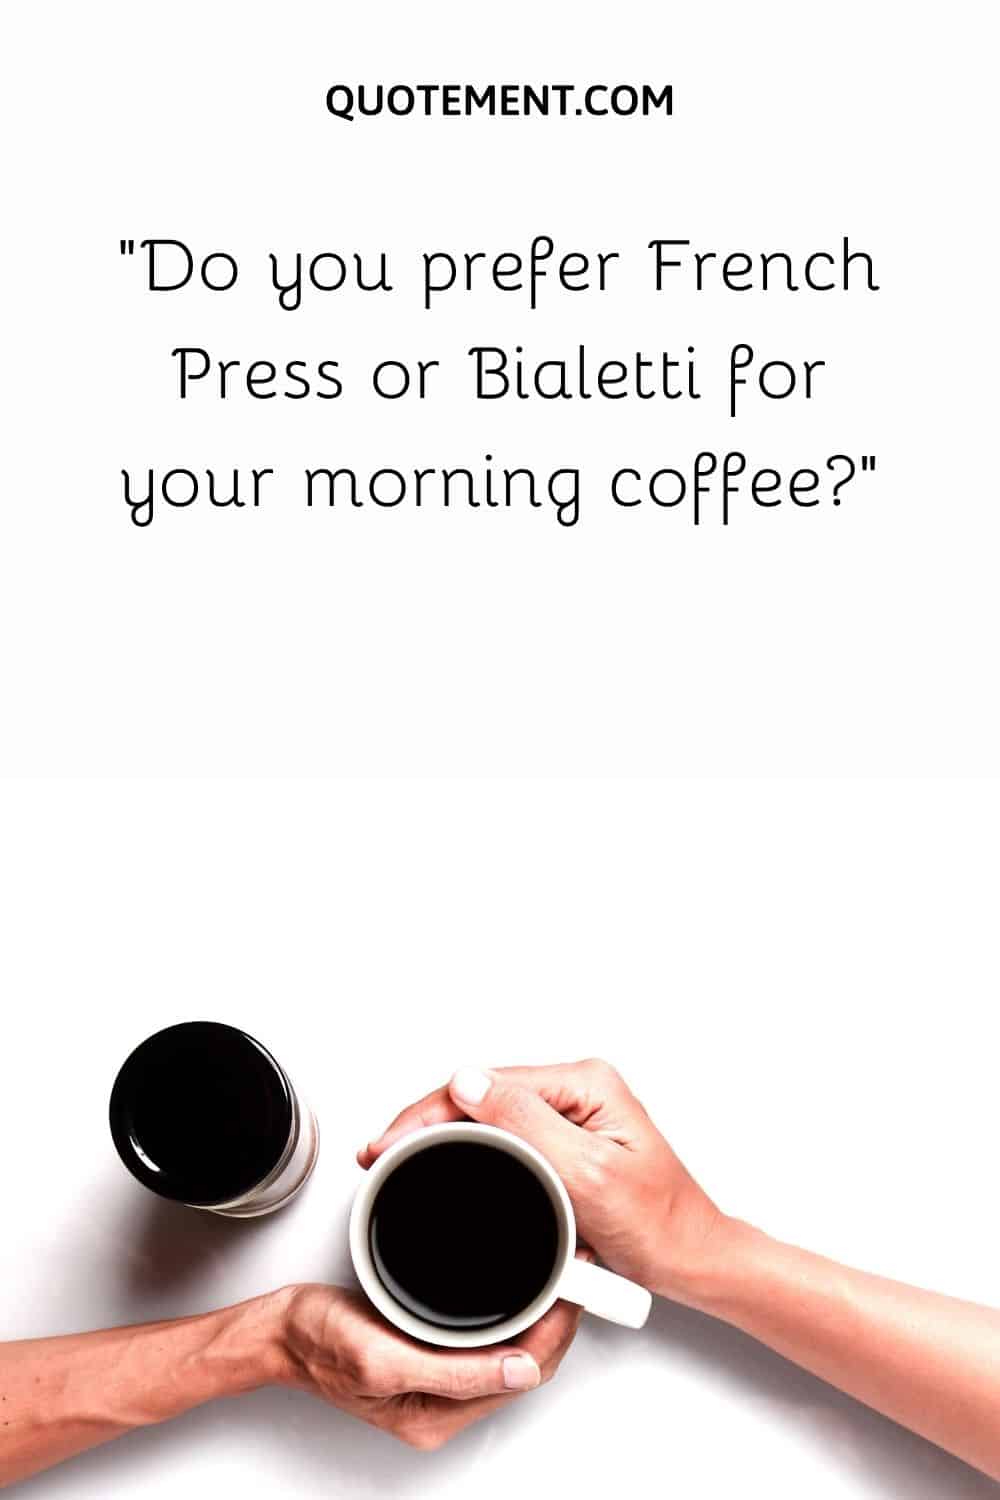 Do you prefer French Press or Bialetti for your morning coffee